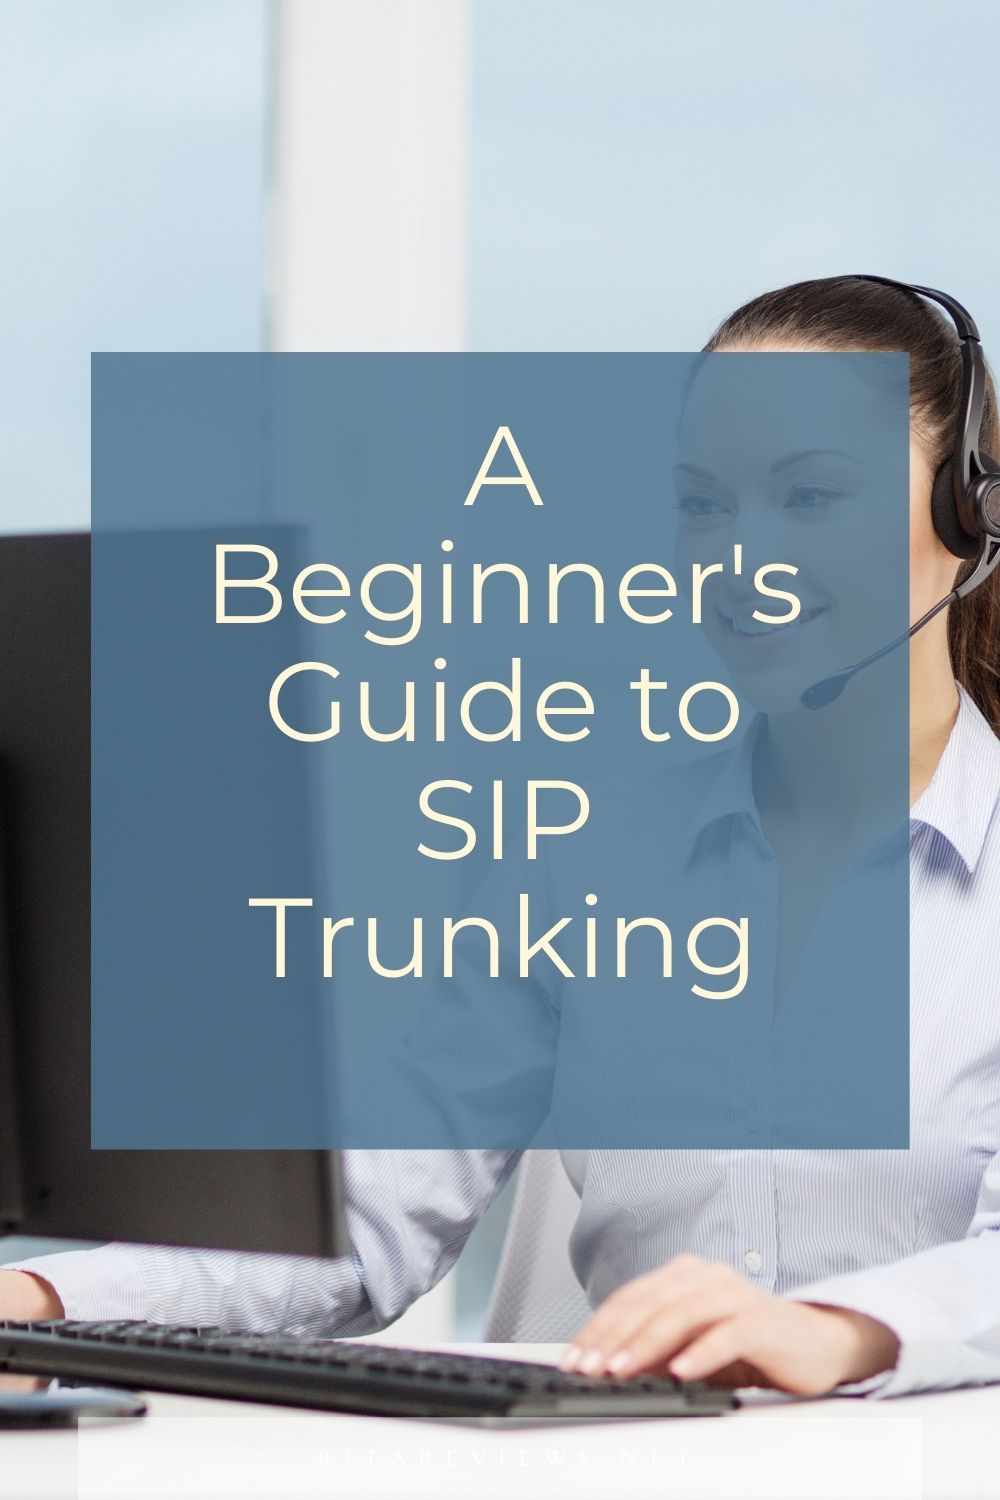 A Beginner's Guide to SIP Trunking